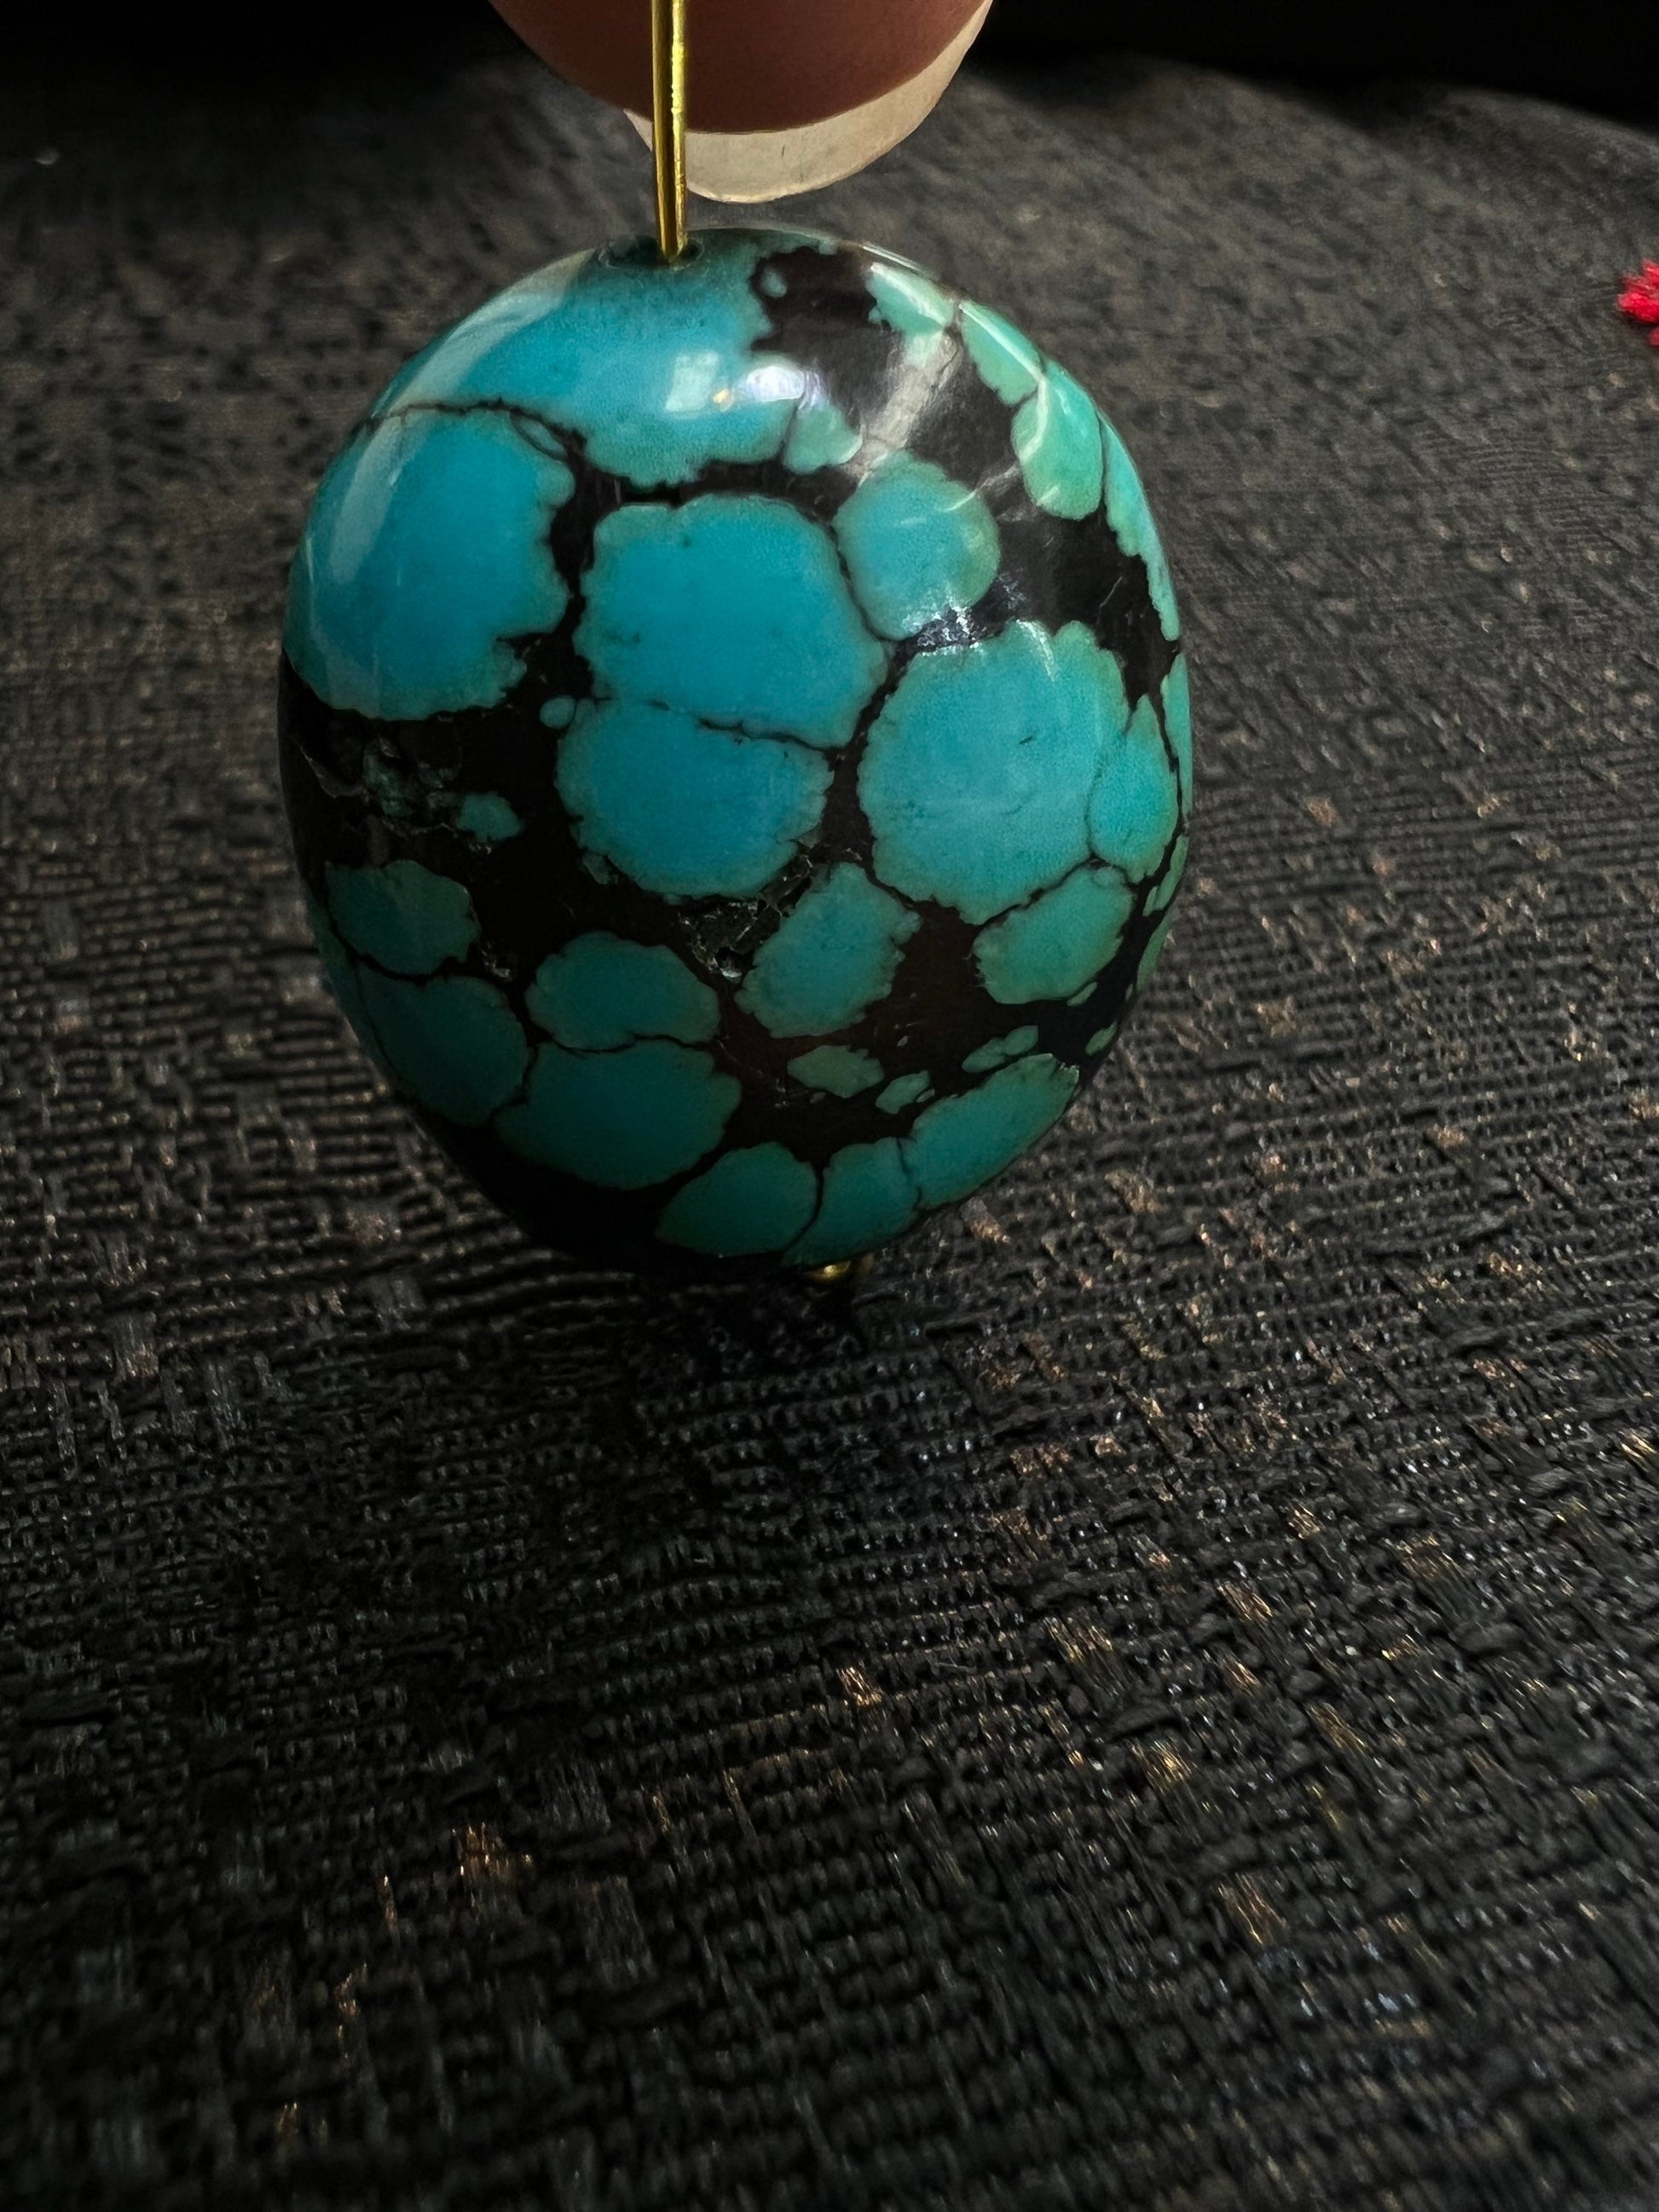 Turquoise Pebble, AAA Tibetian Spiderweb Blue Turquoise pebble 23x28 Rare,jewelry Focal,pendant,palm stone,pocket stone,collection, healing